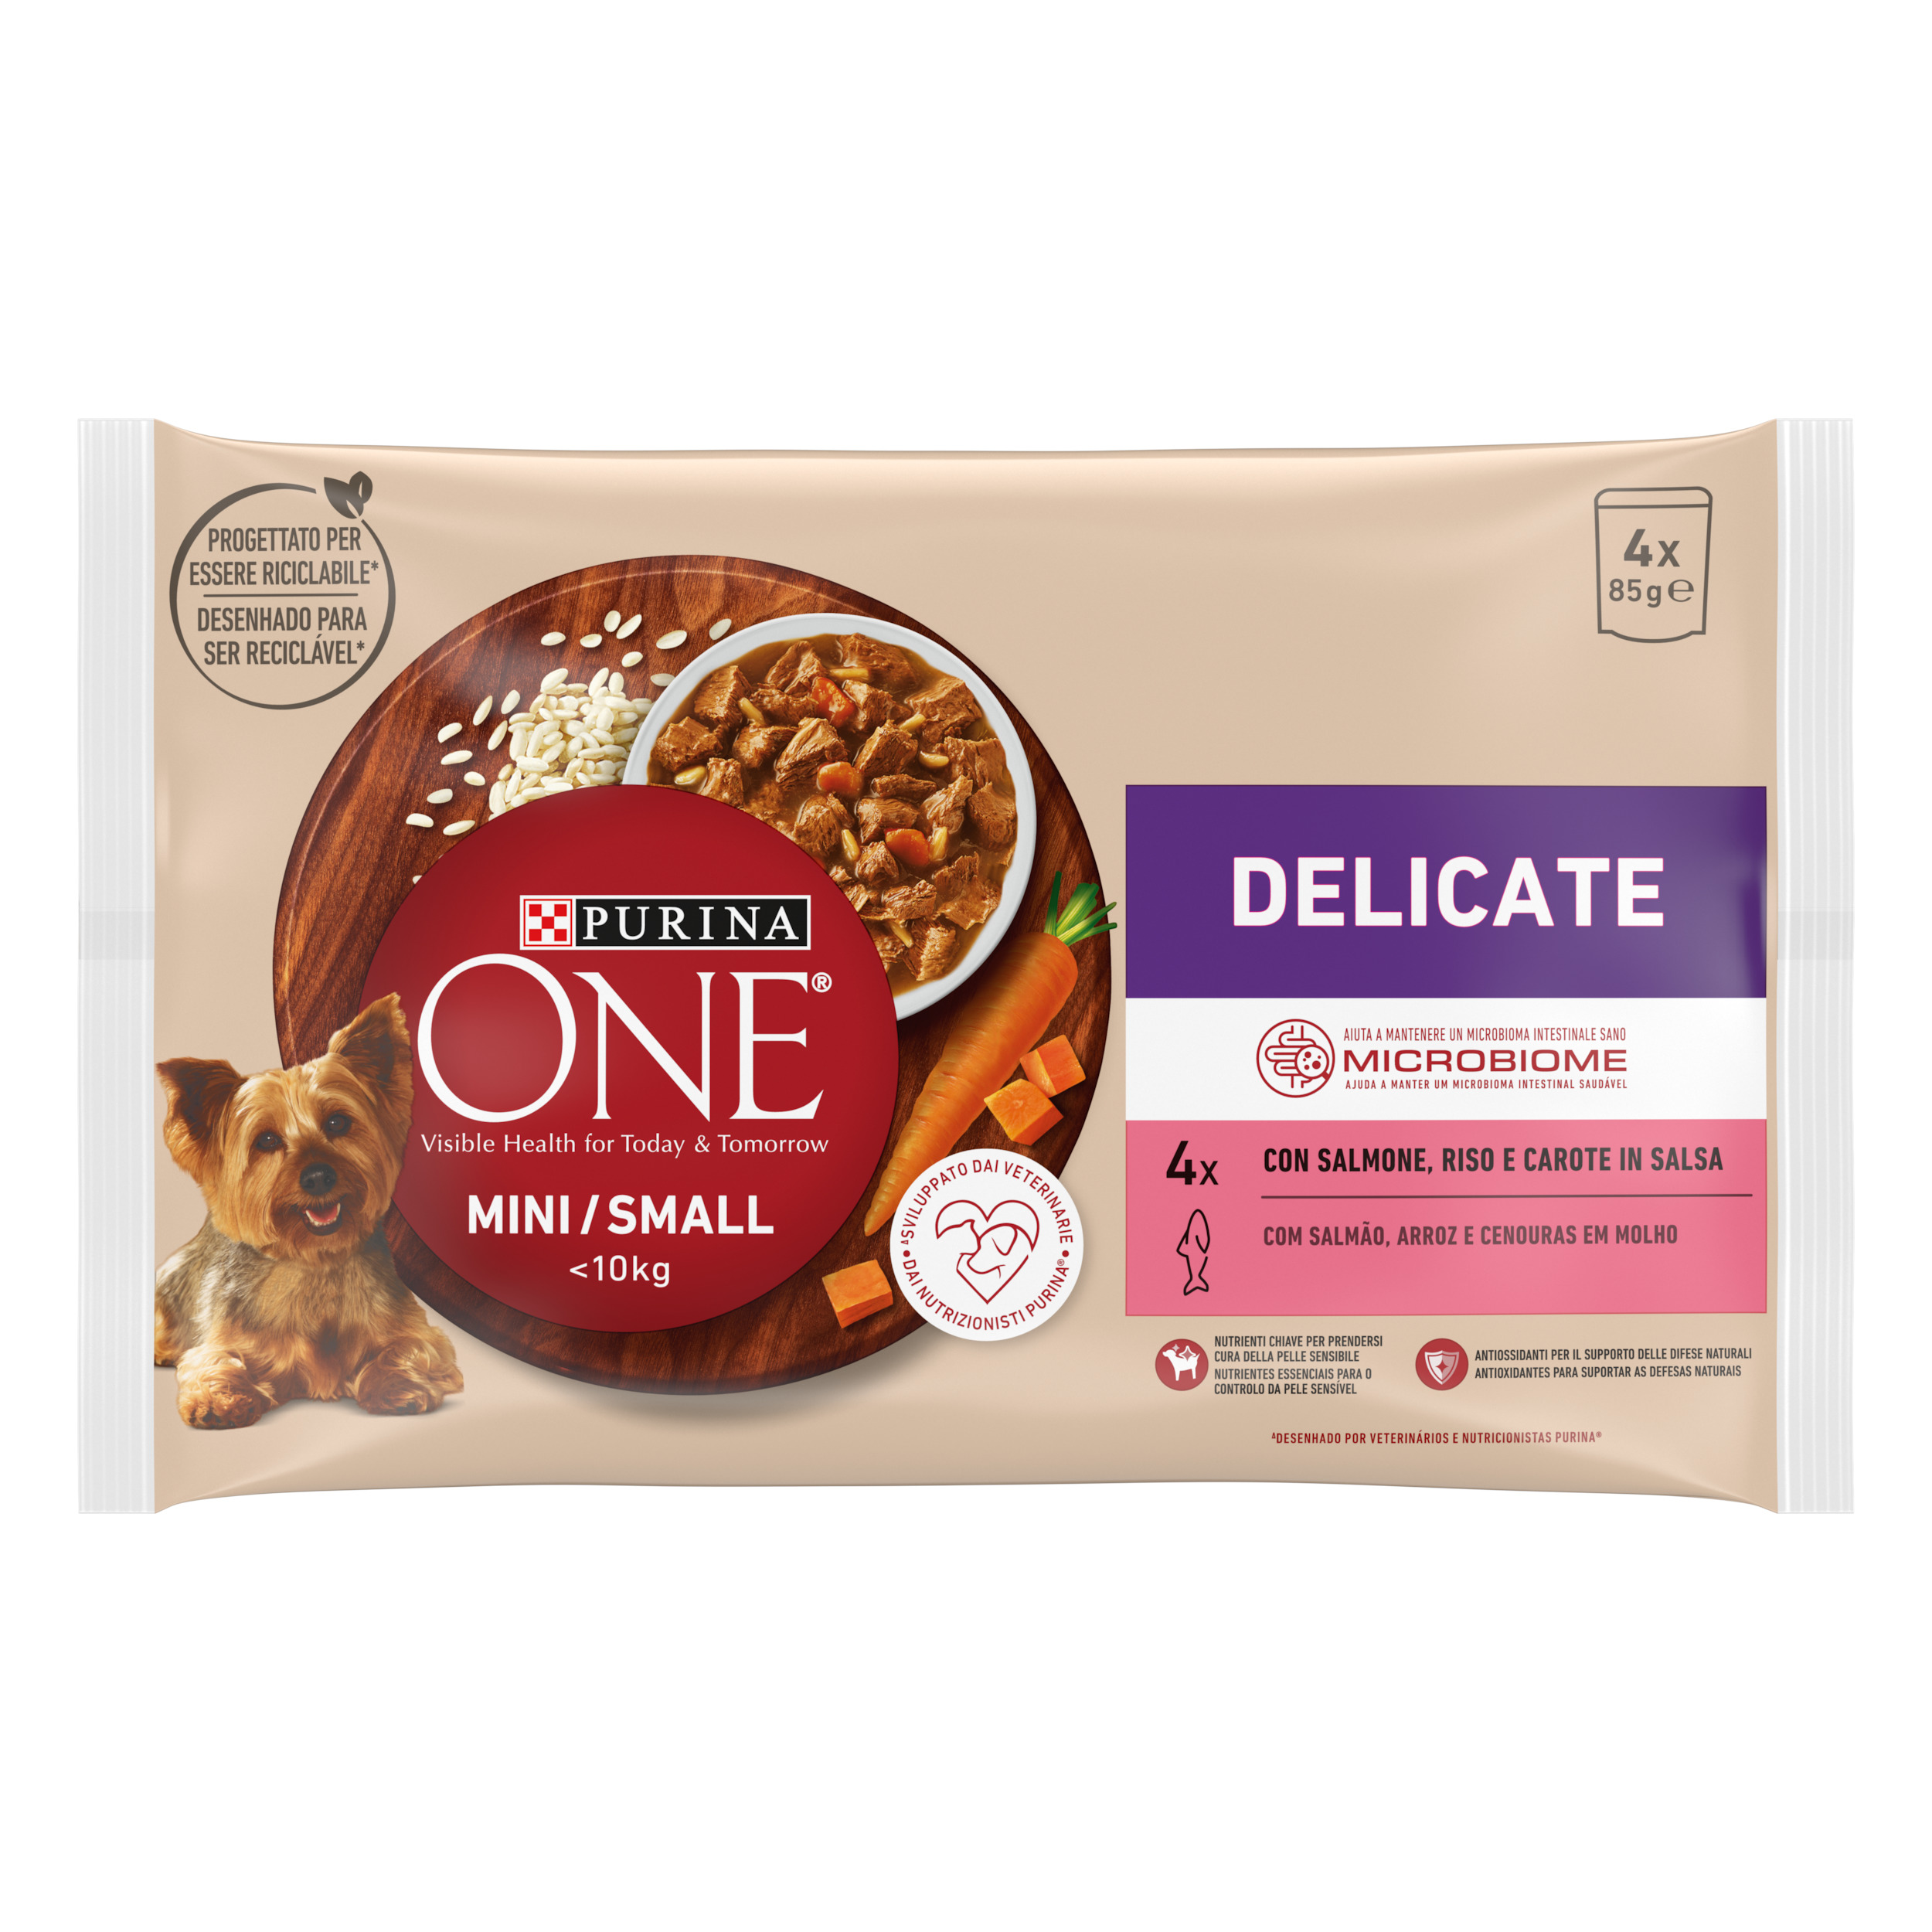 Purina ONE Delicate Salmon with Rice & Vegetables Wet Food for Mini & Small Adult Dogs 4x85g